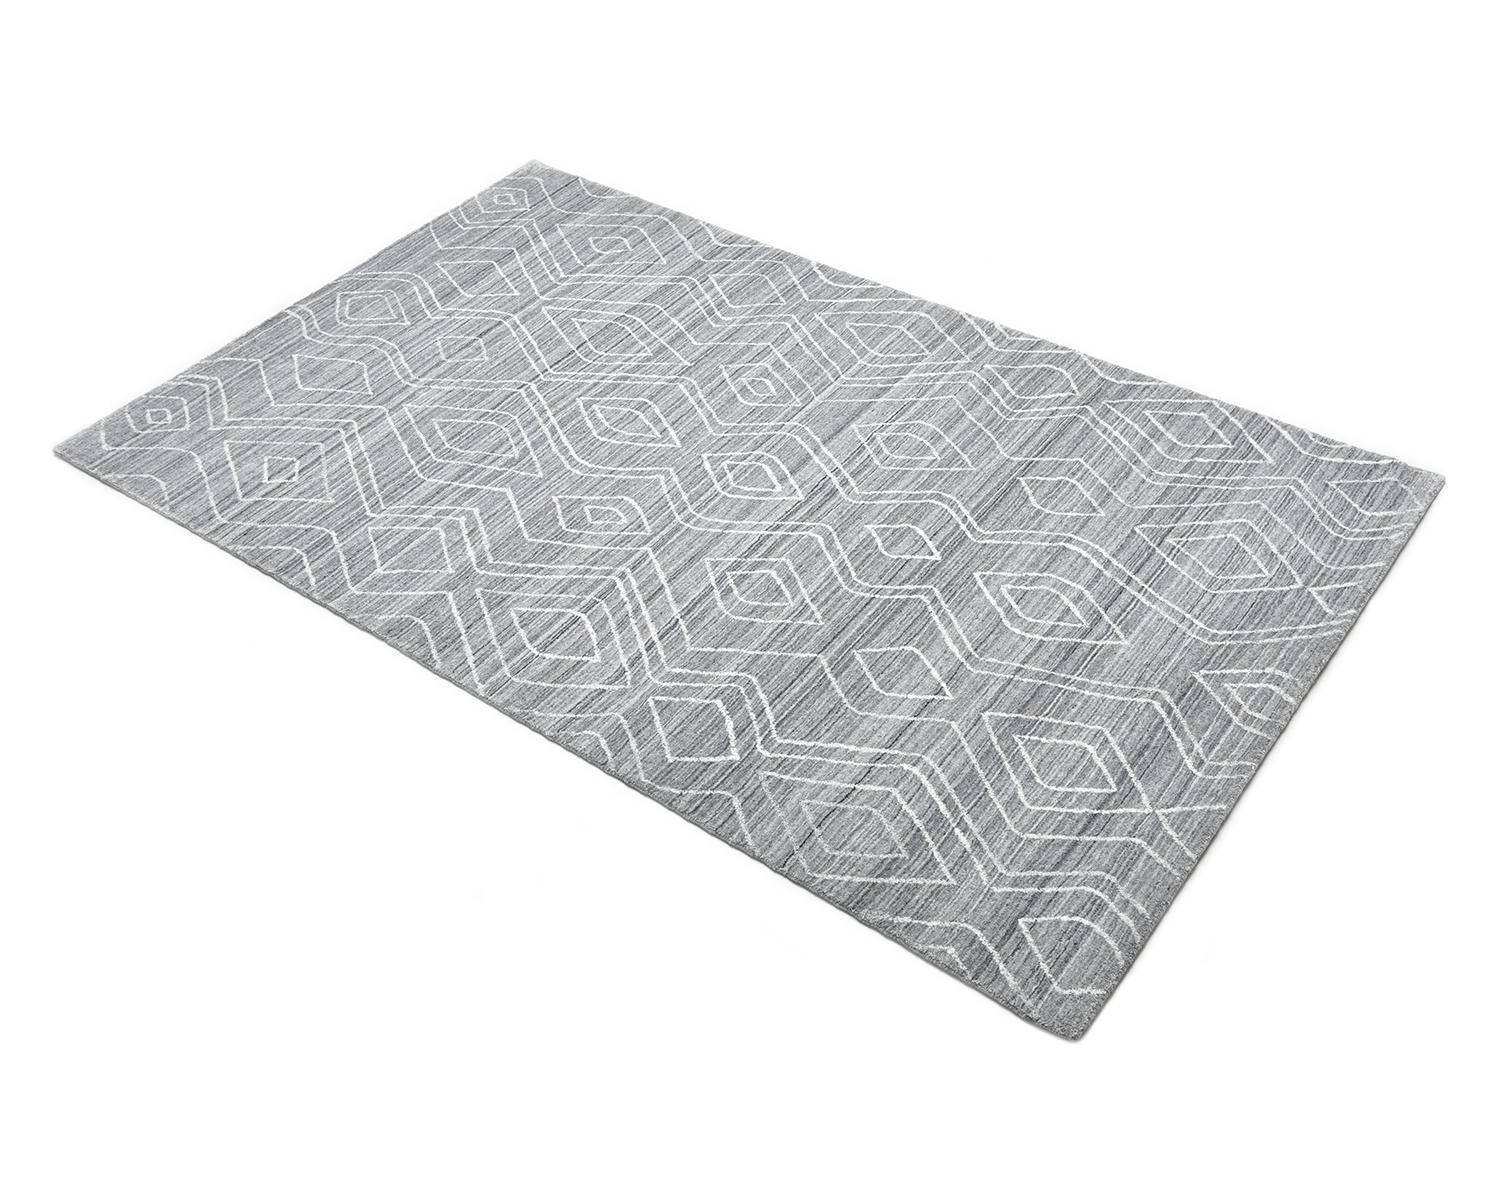 Solo Rugs Moroccan Geometric Hand Loomed Light Grey Area Rug For Sale 1